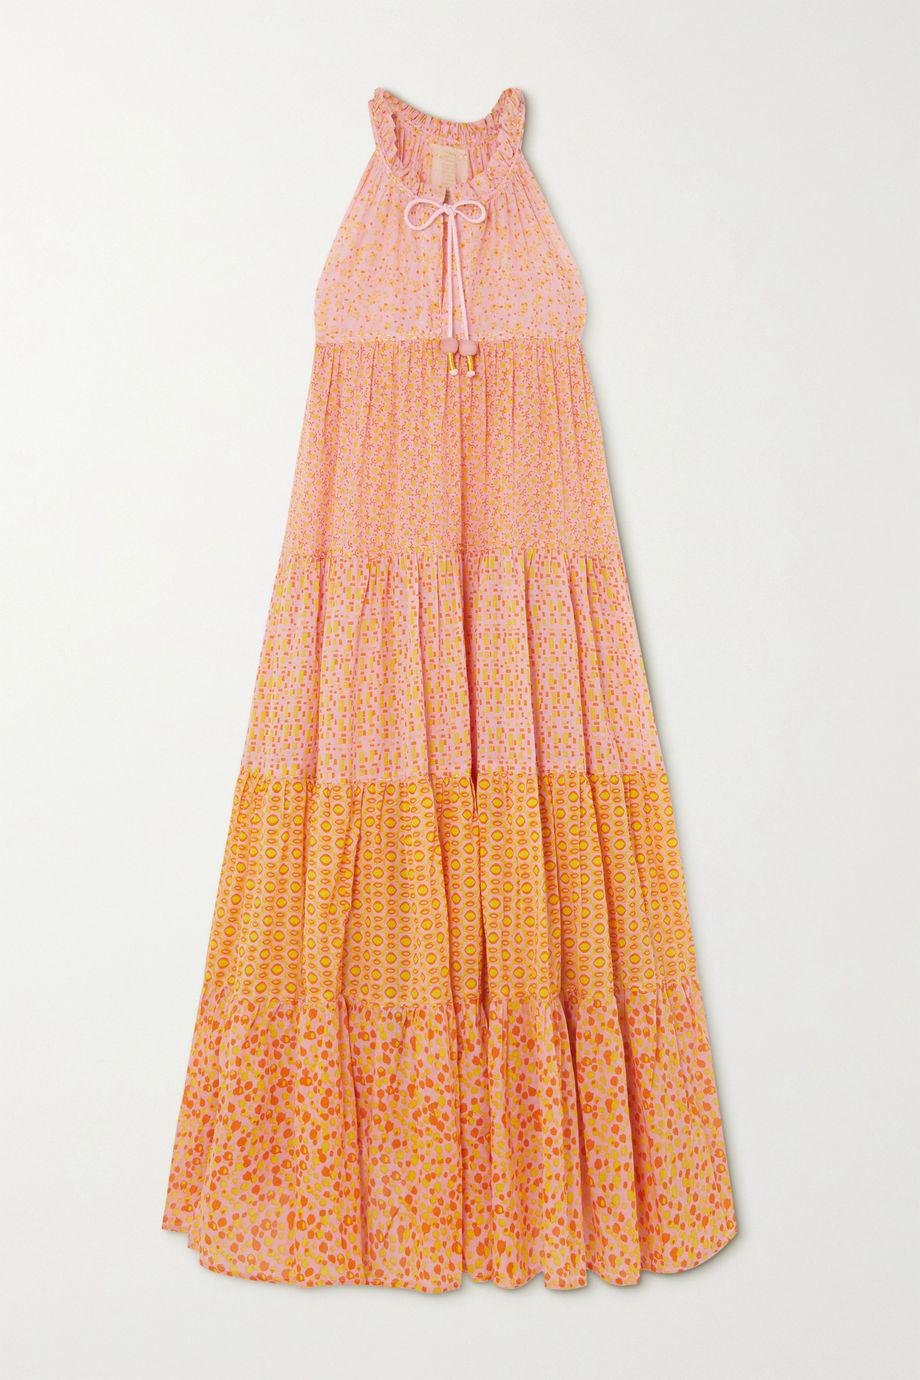 + NET SUSTAIN Hippy tiered printed cotton-voile maxi dress by YVONNE S